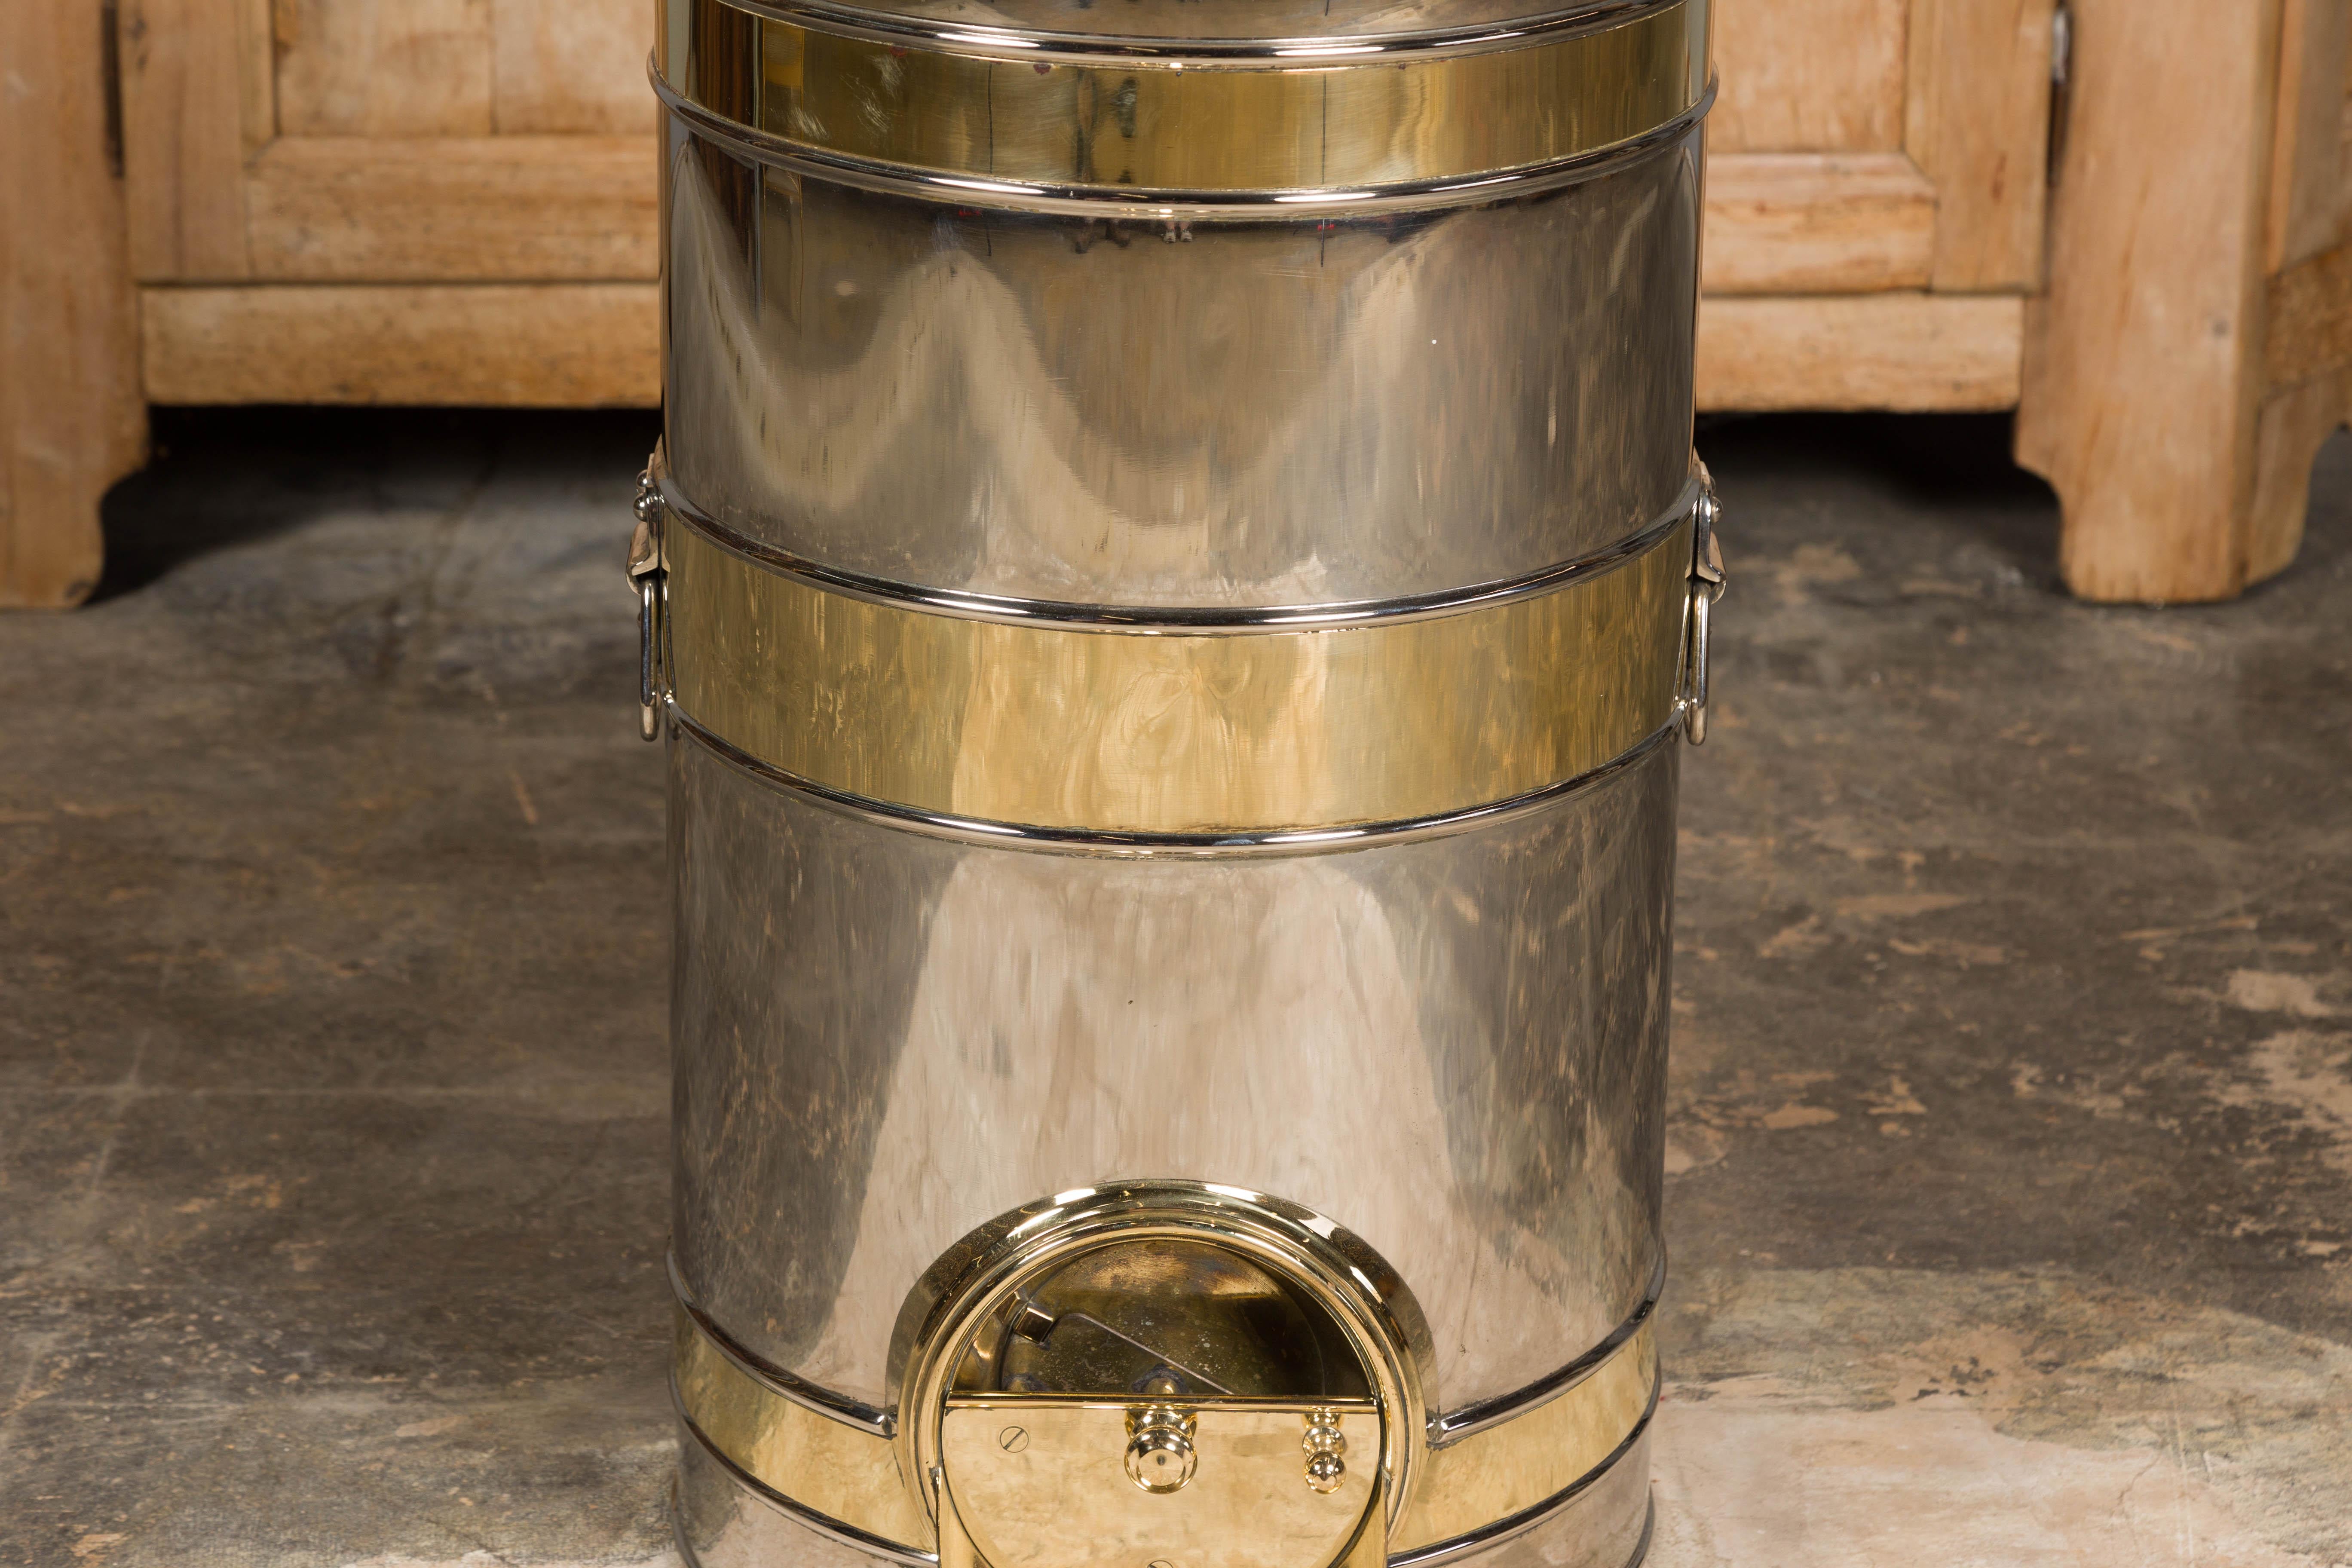 French Turn of the Century Steel and Brass Coffee Bean Dispenser, circa 1900 For Sale 1